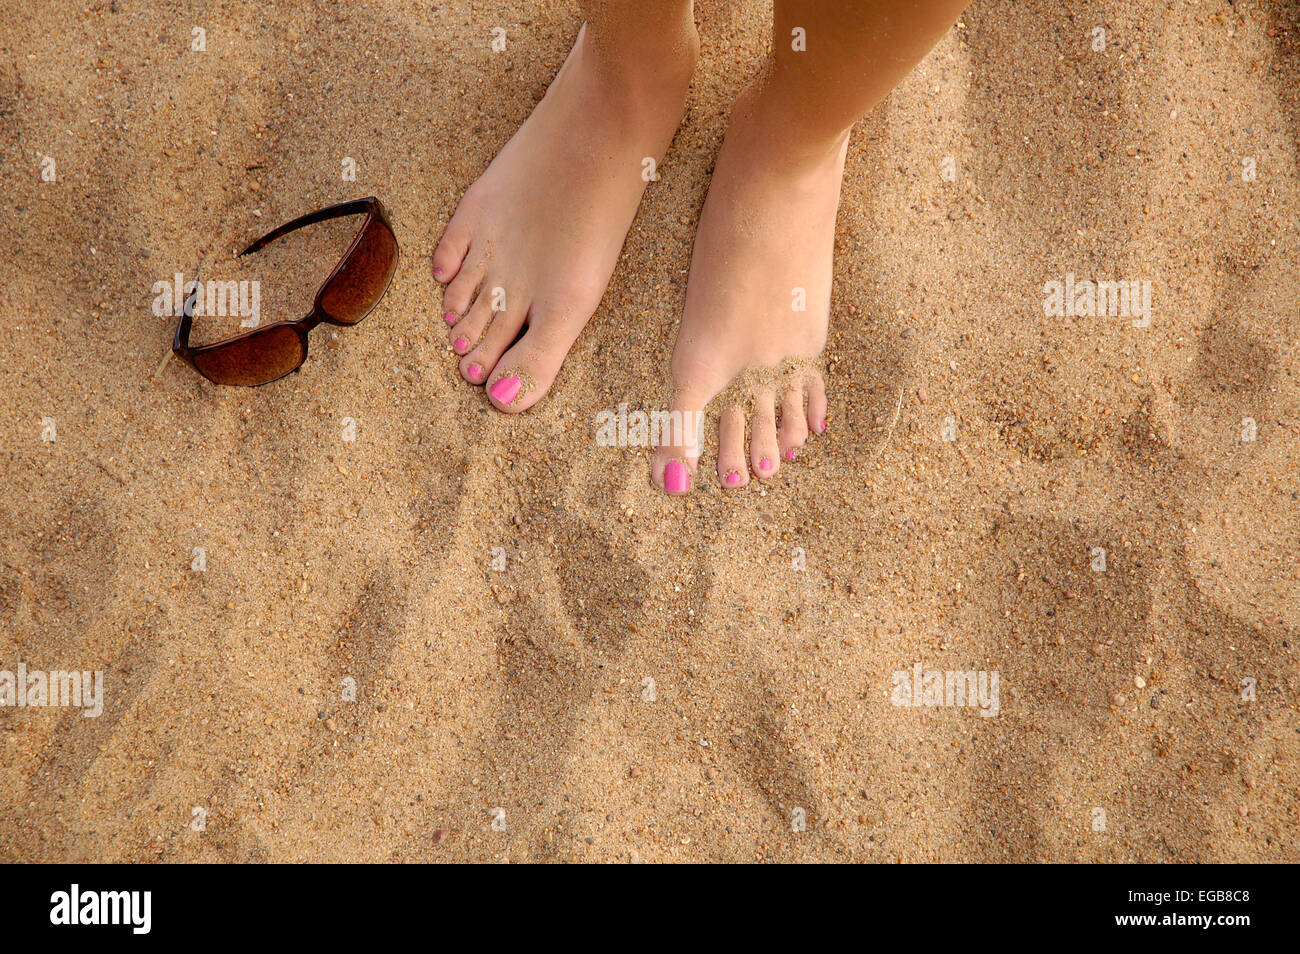 A woman's feet in the sand, standing on a beach. Her toenails are ...